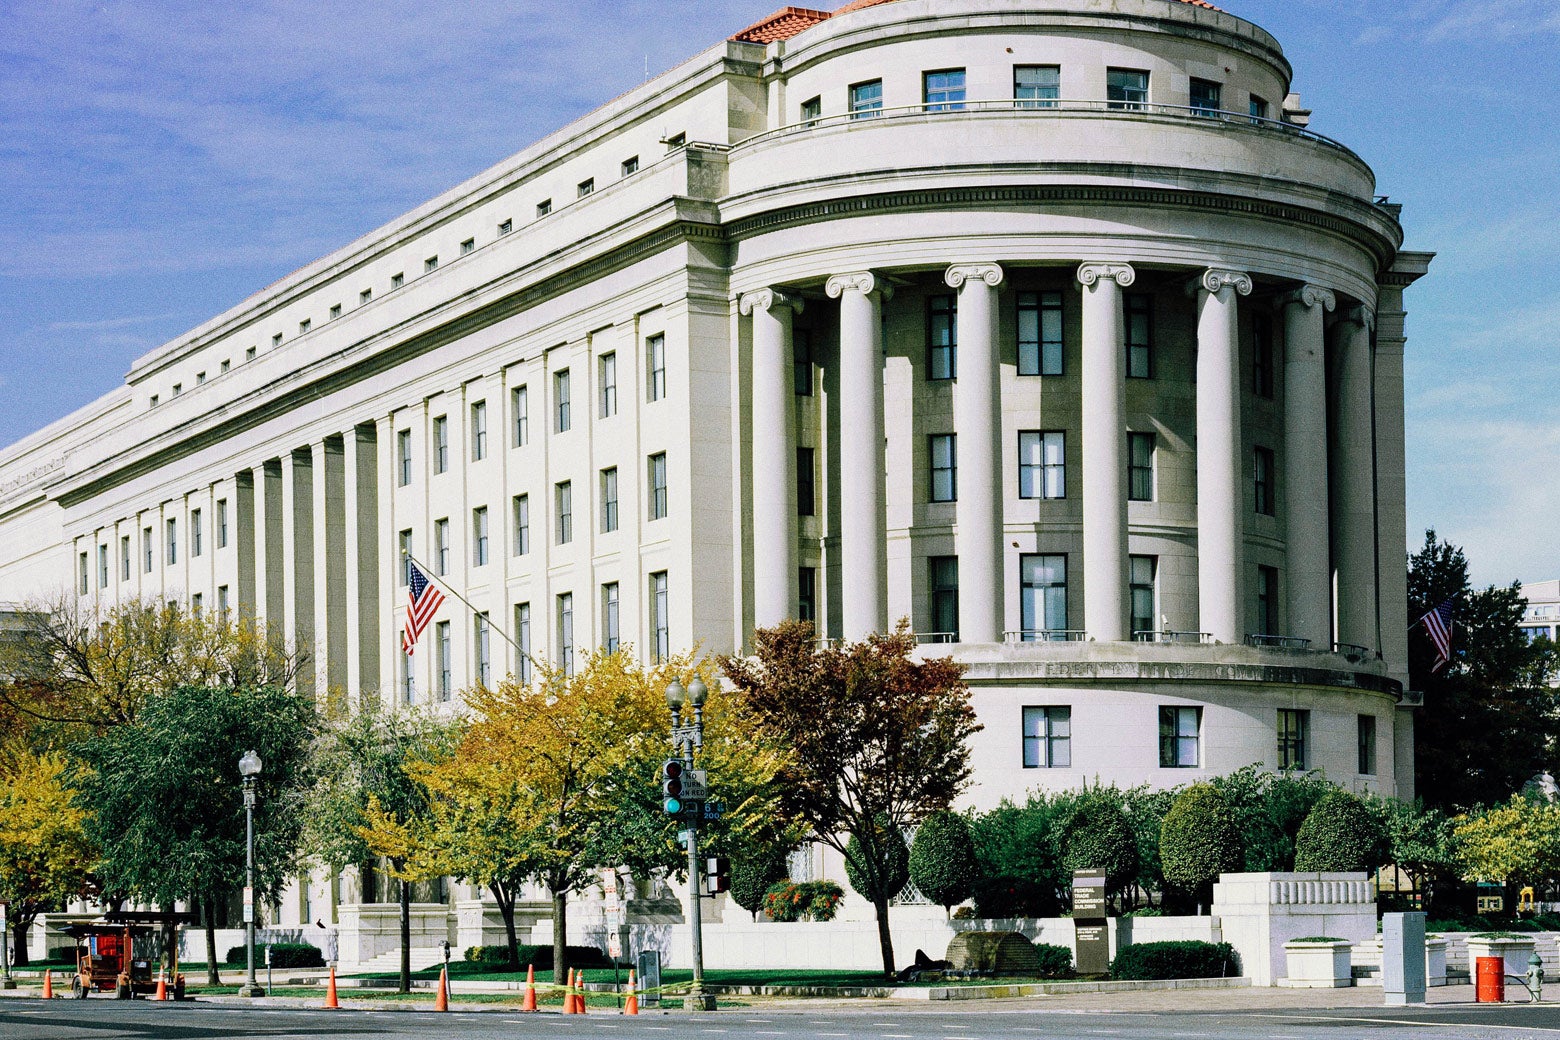 The FTC building in Washington.